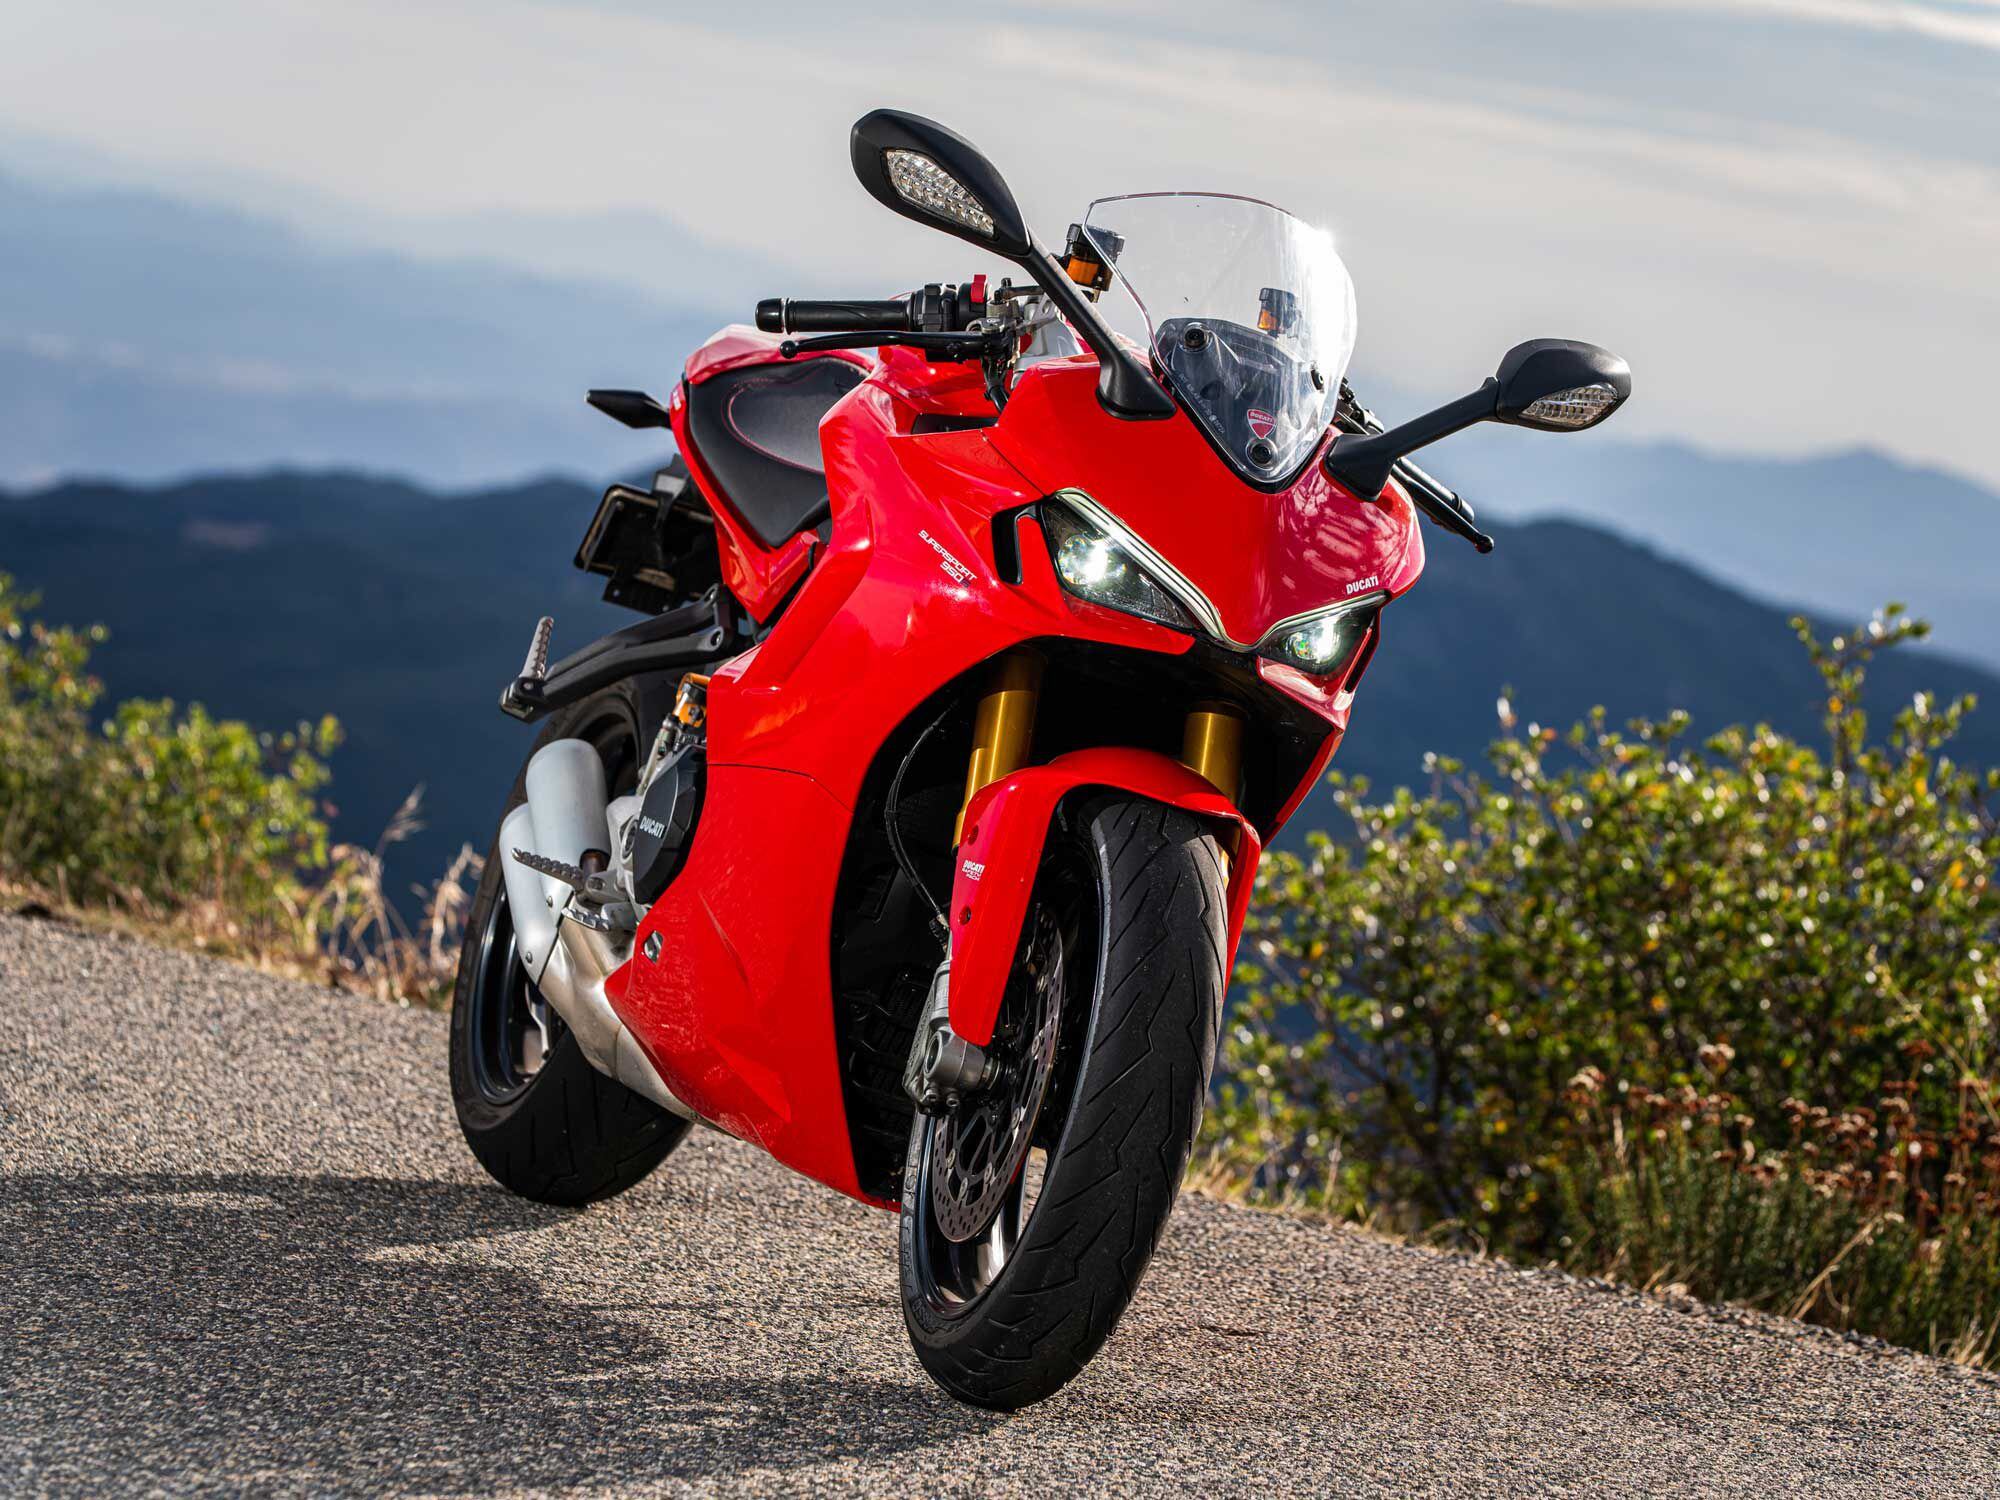 Folks seeking a milder, gentler sportbike that pays homage to Ducati’s roots, will like the 2022 SuperSport 950 S.